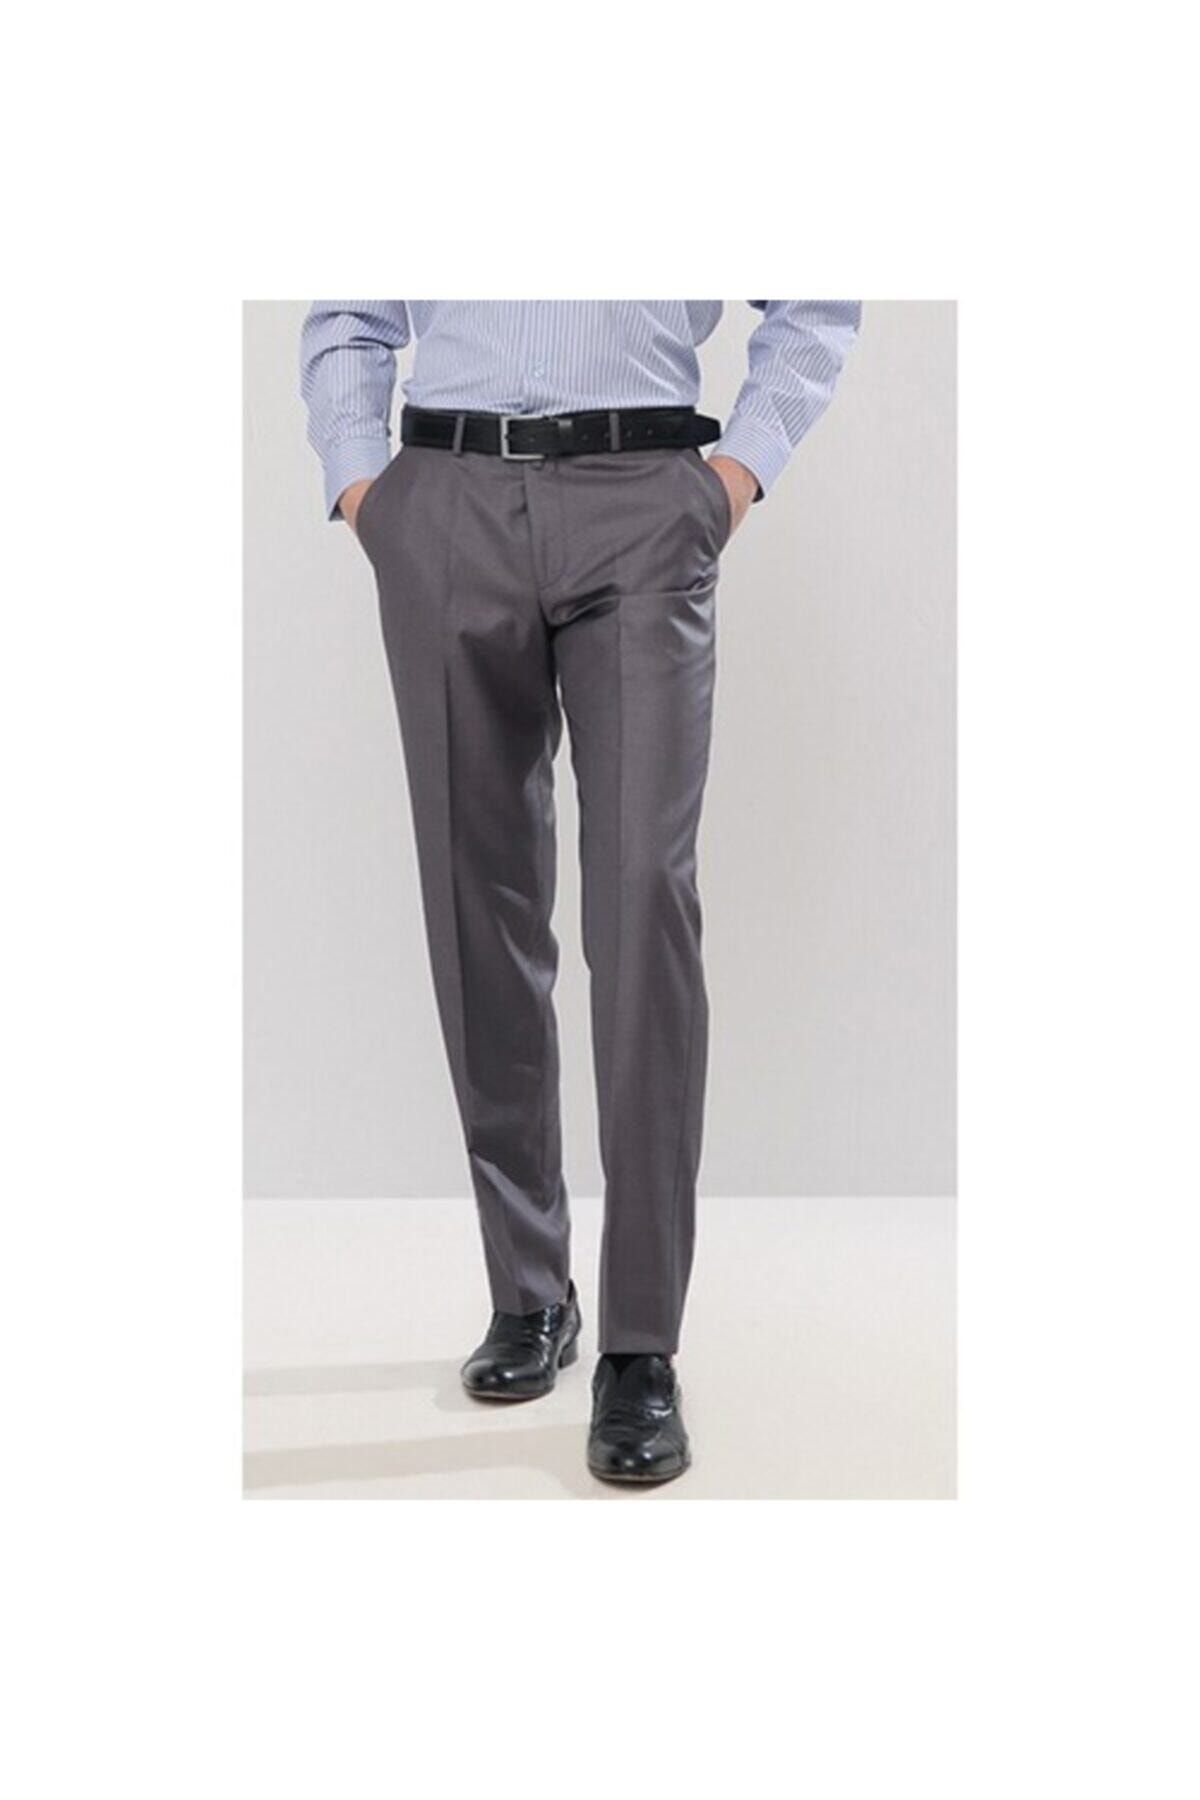 Formal shirts and pants combination with grey pant | Grey pants men, Gray  dress shirt men, Pants outfit men